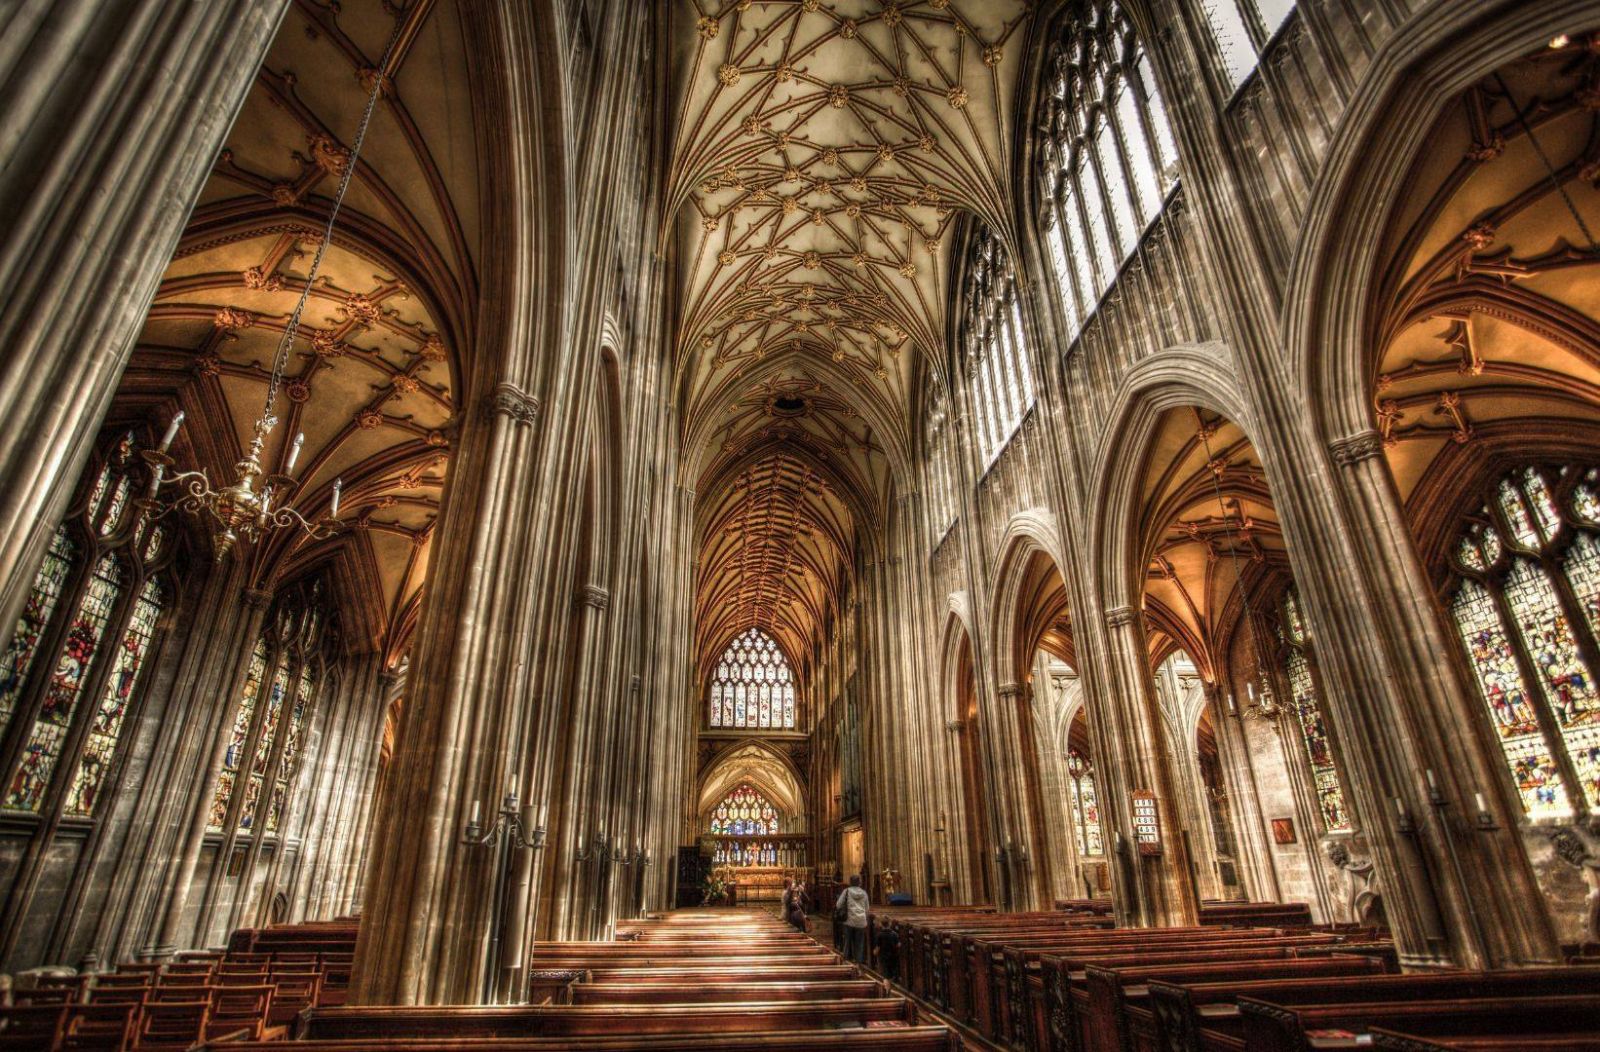 Inside St Mary Redcliffe Church